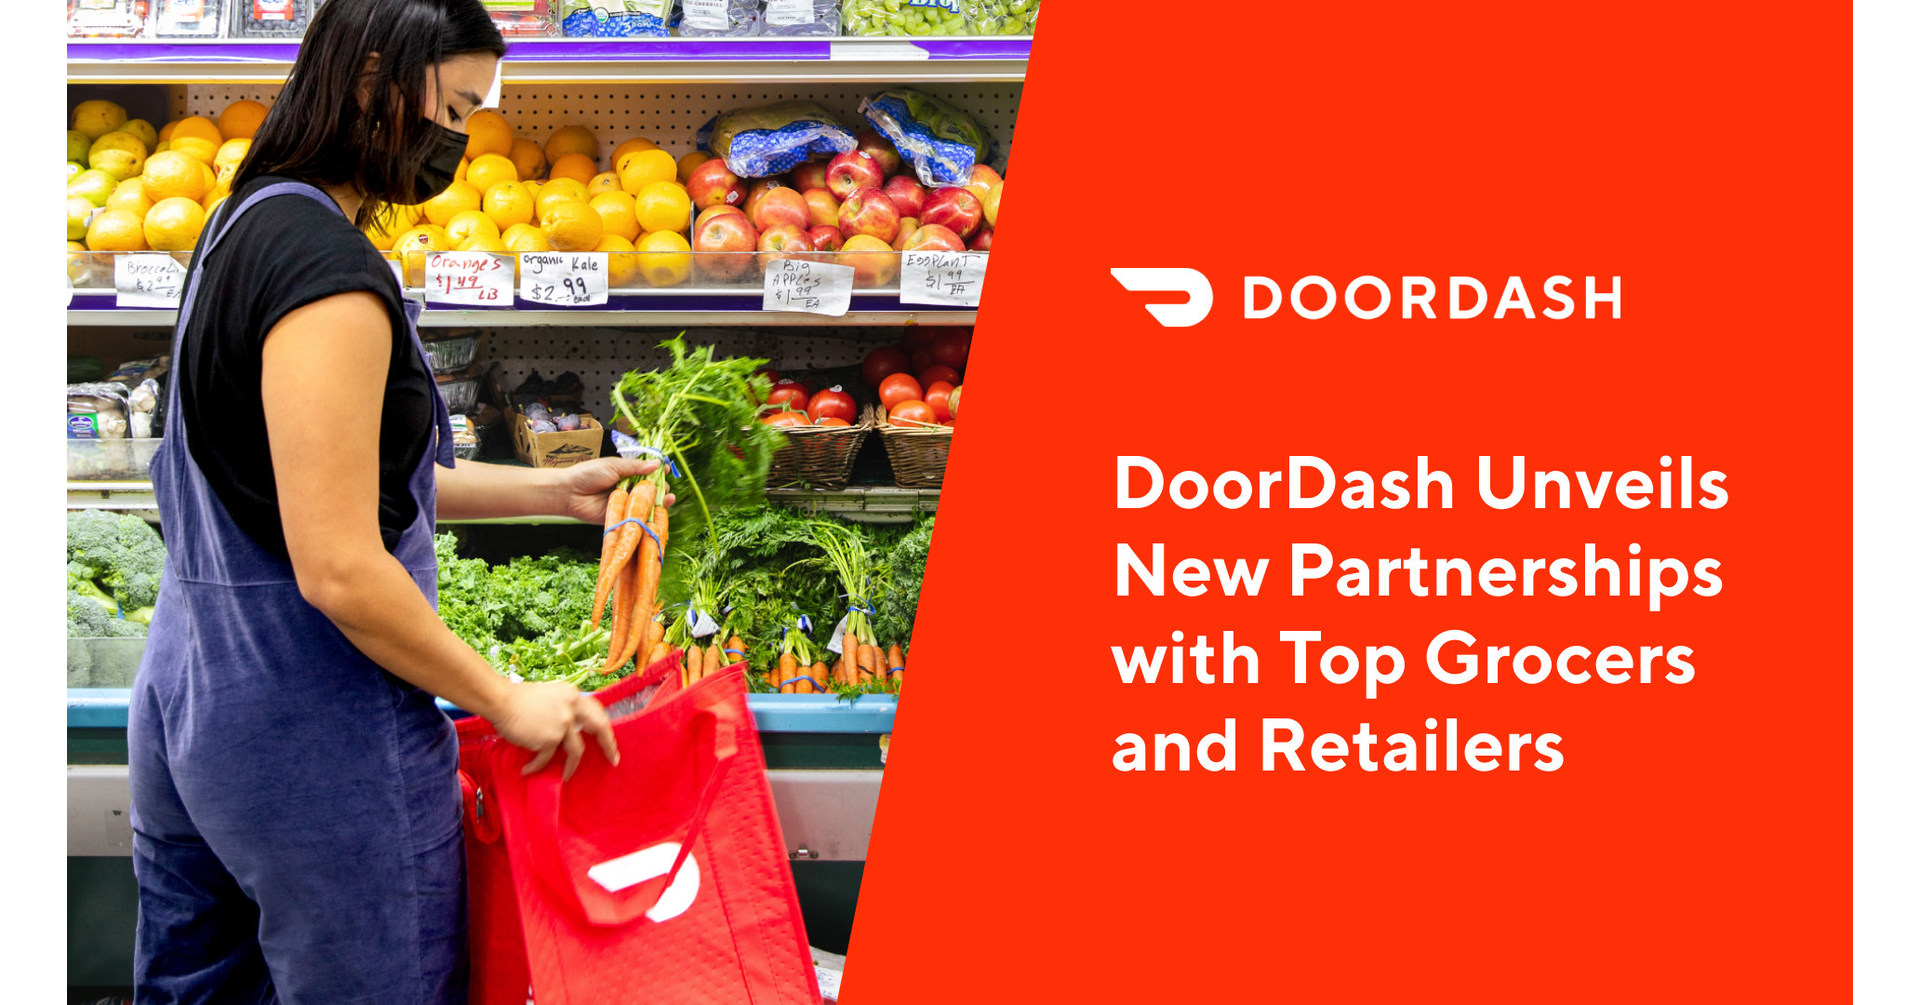 WeWork and DoorDash Announce Exclusive Partnership, Support for